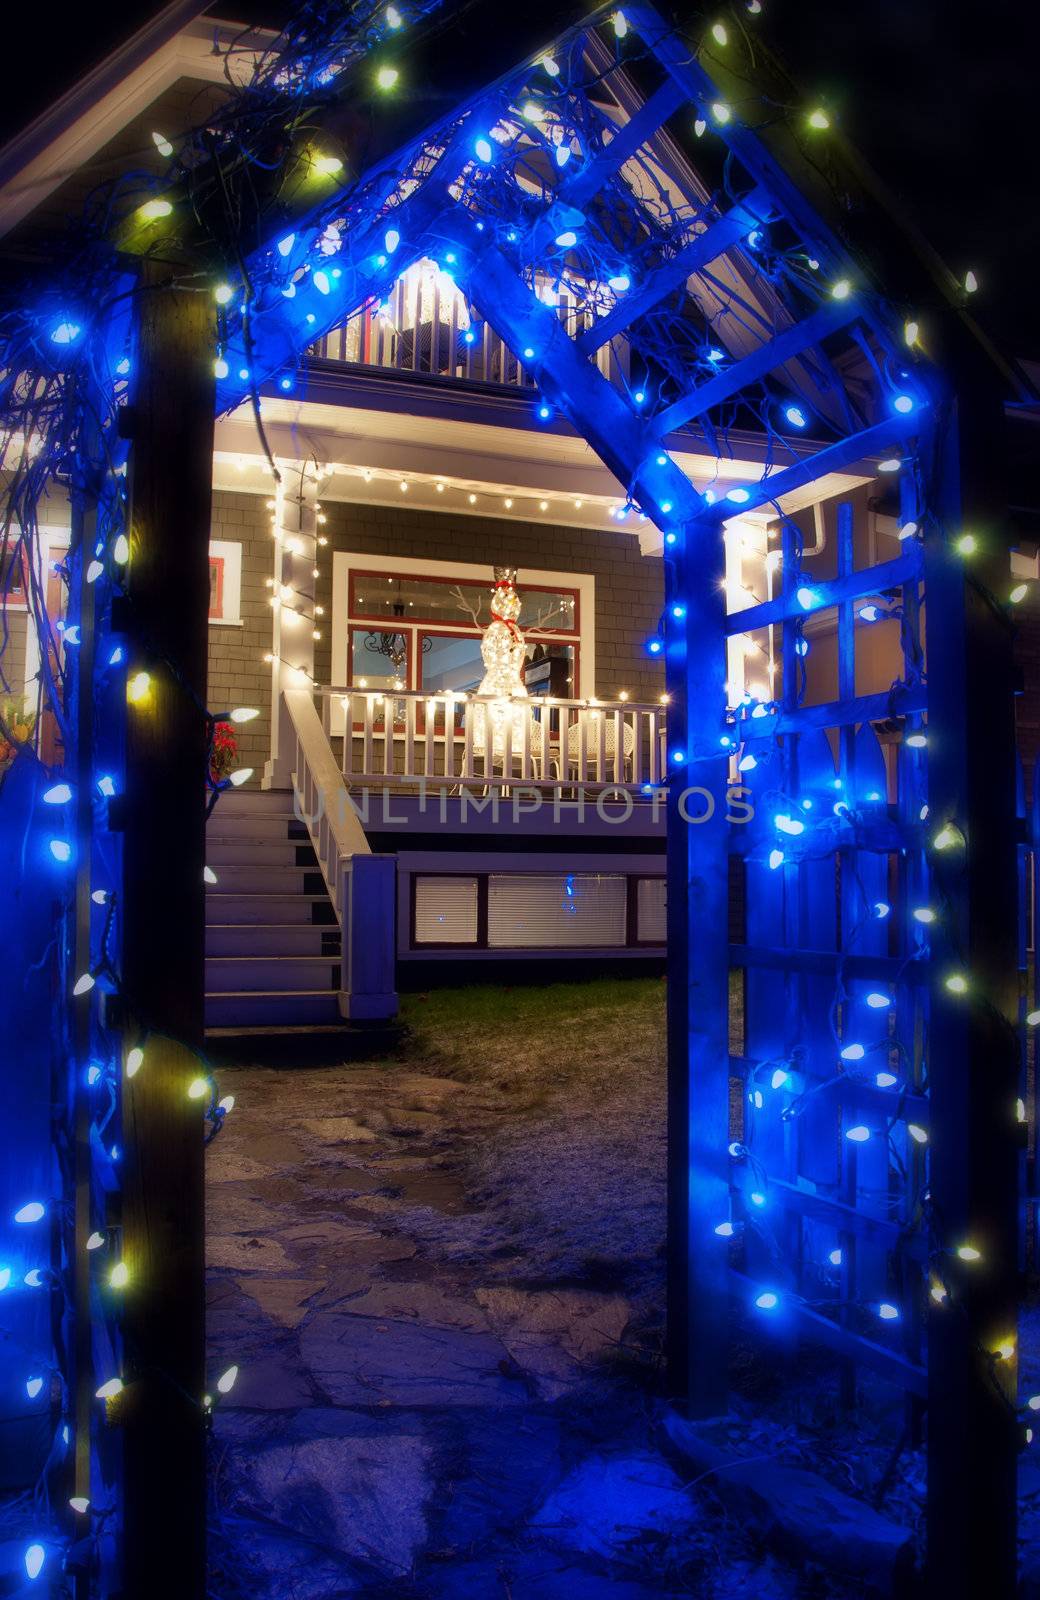 Blue Christmas Light Archway in front of house with snowman